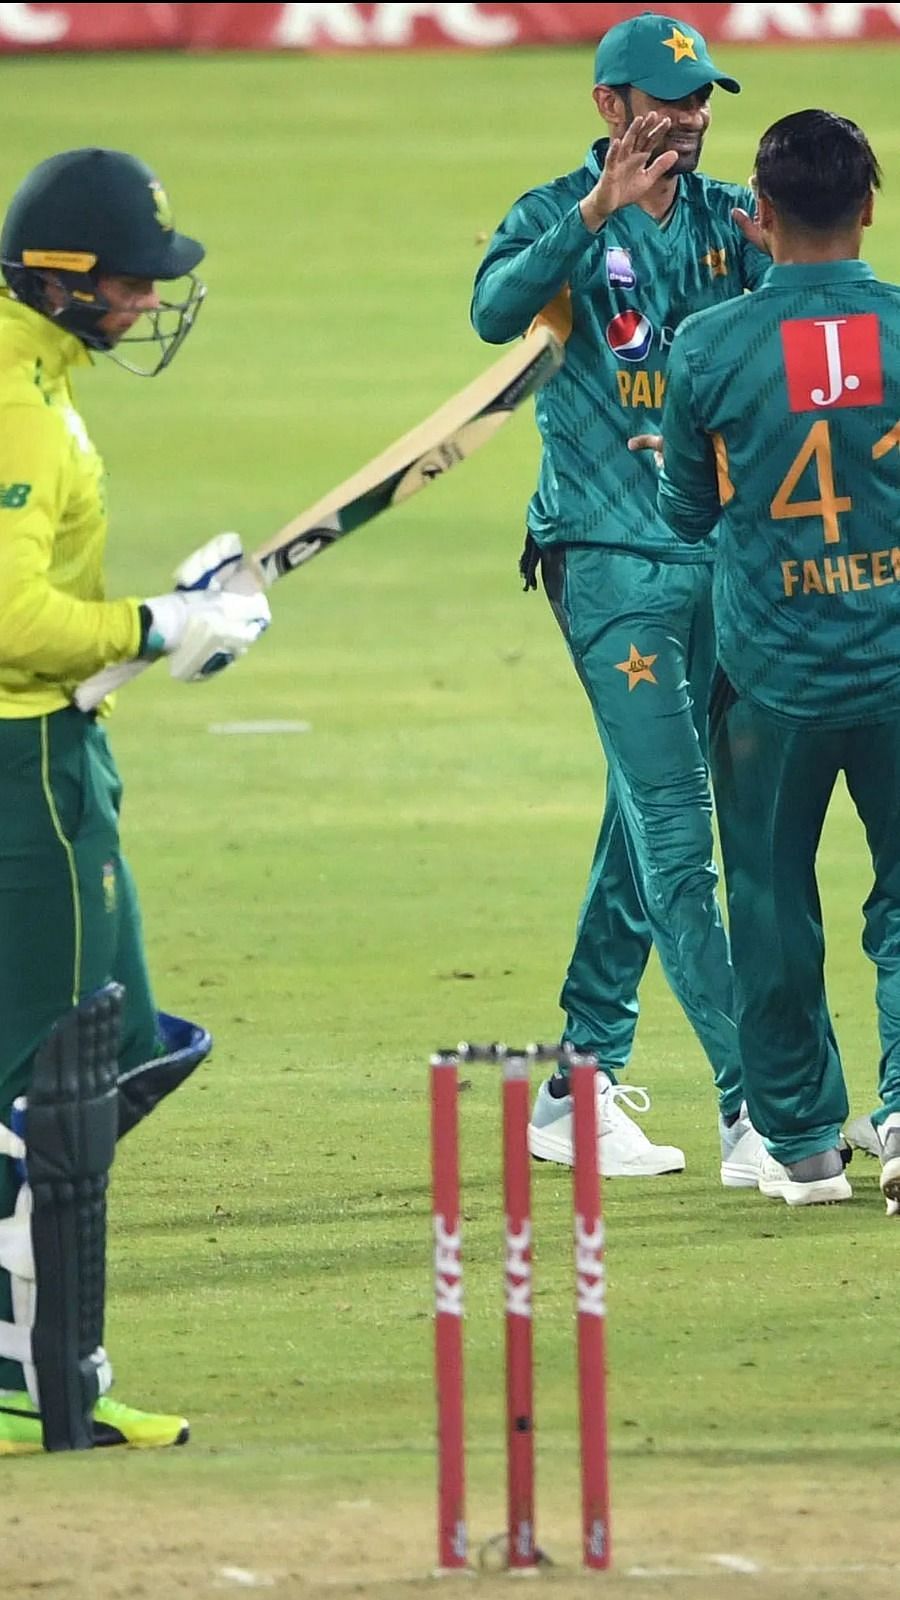 PAK v SA 2021 Live streaming and telecast details Where to watch Pakistan vs South Africa T20I series?